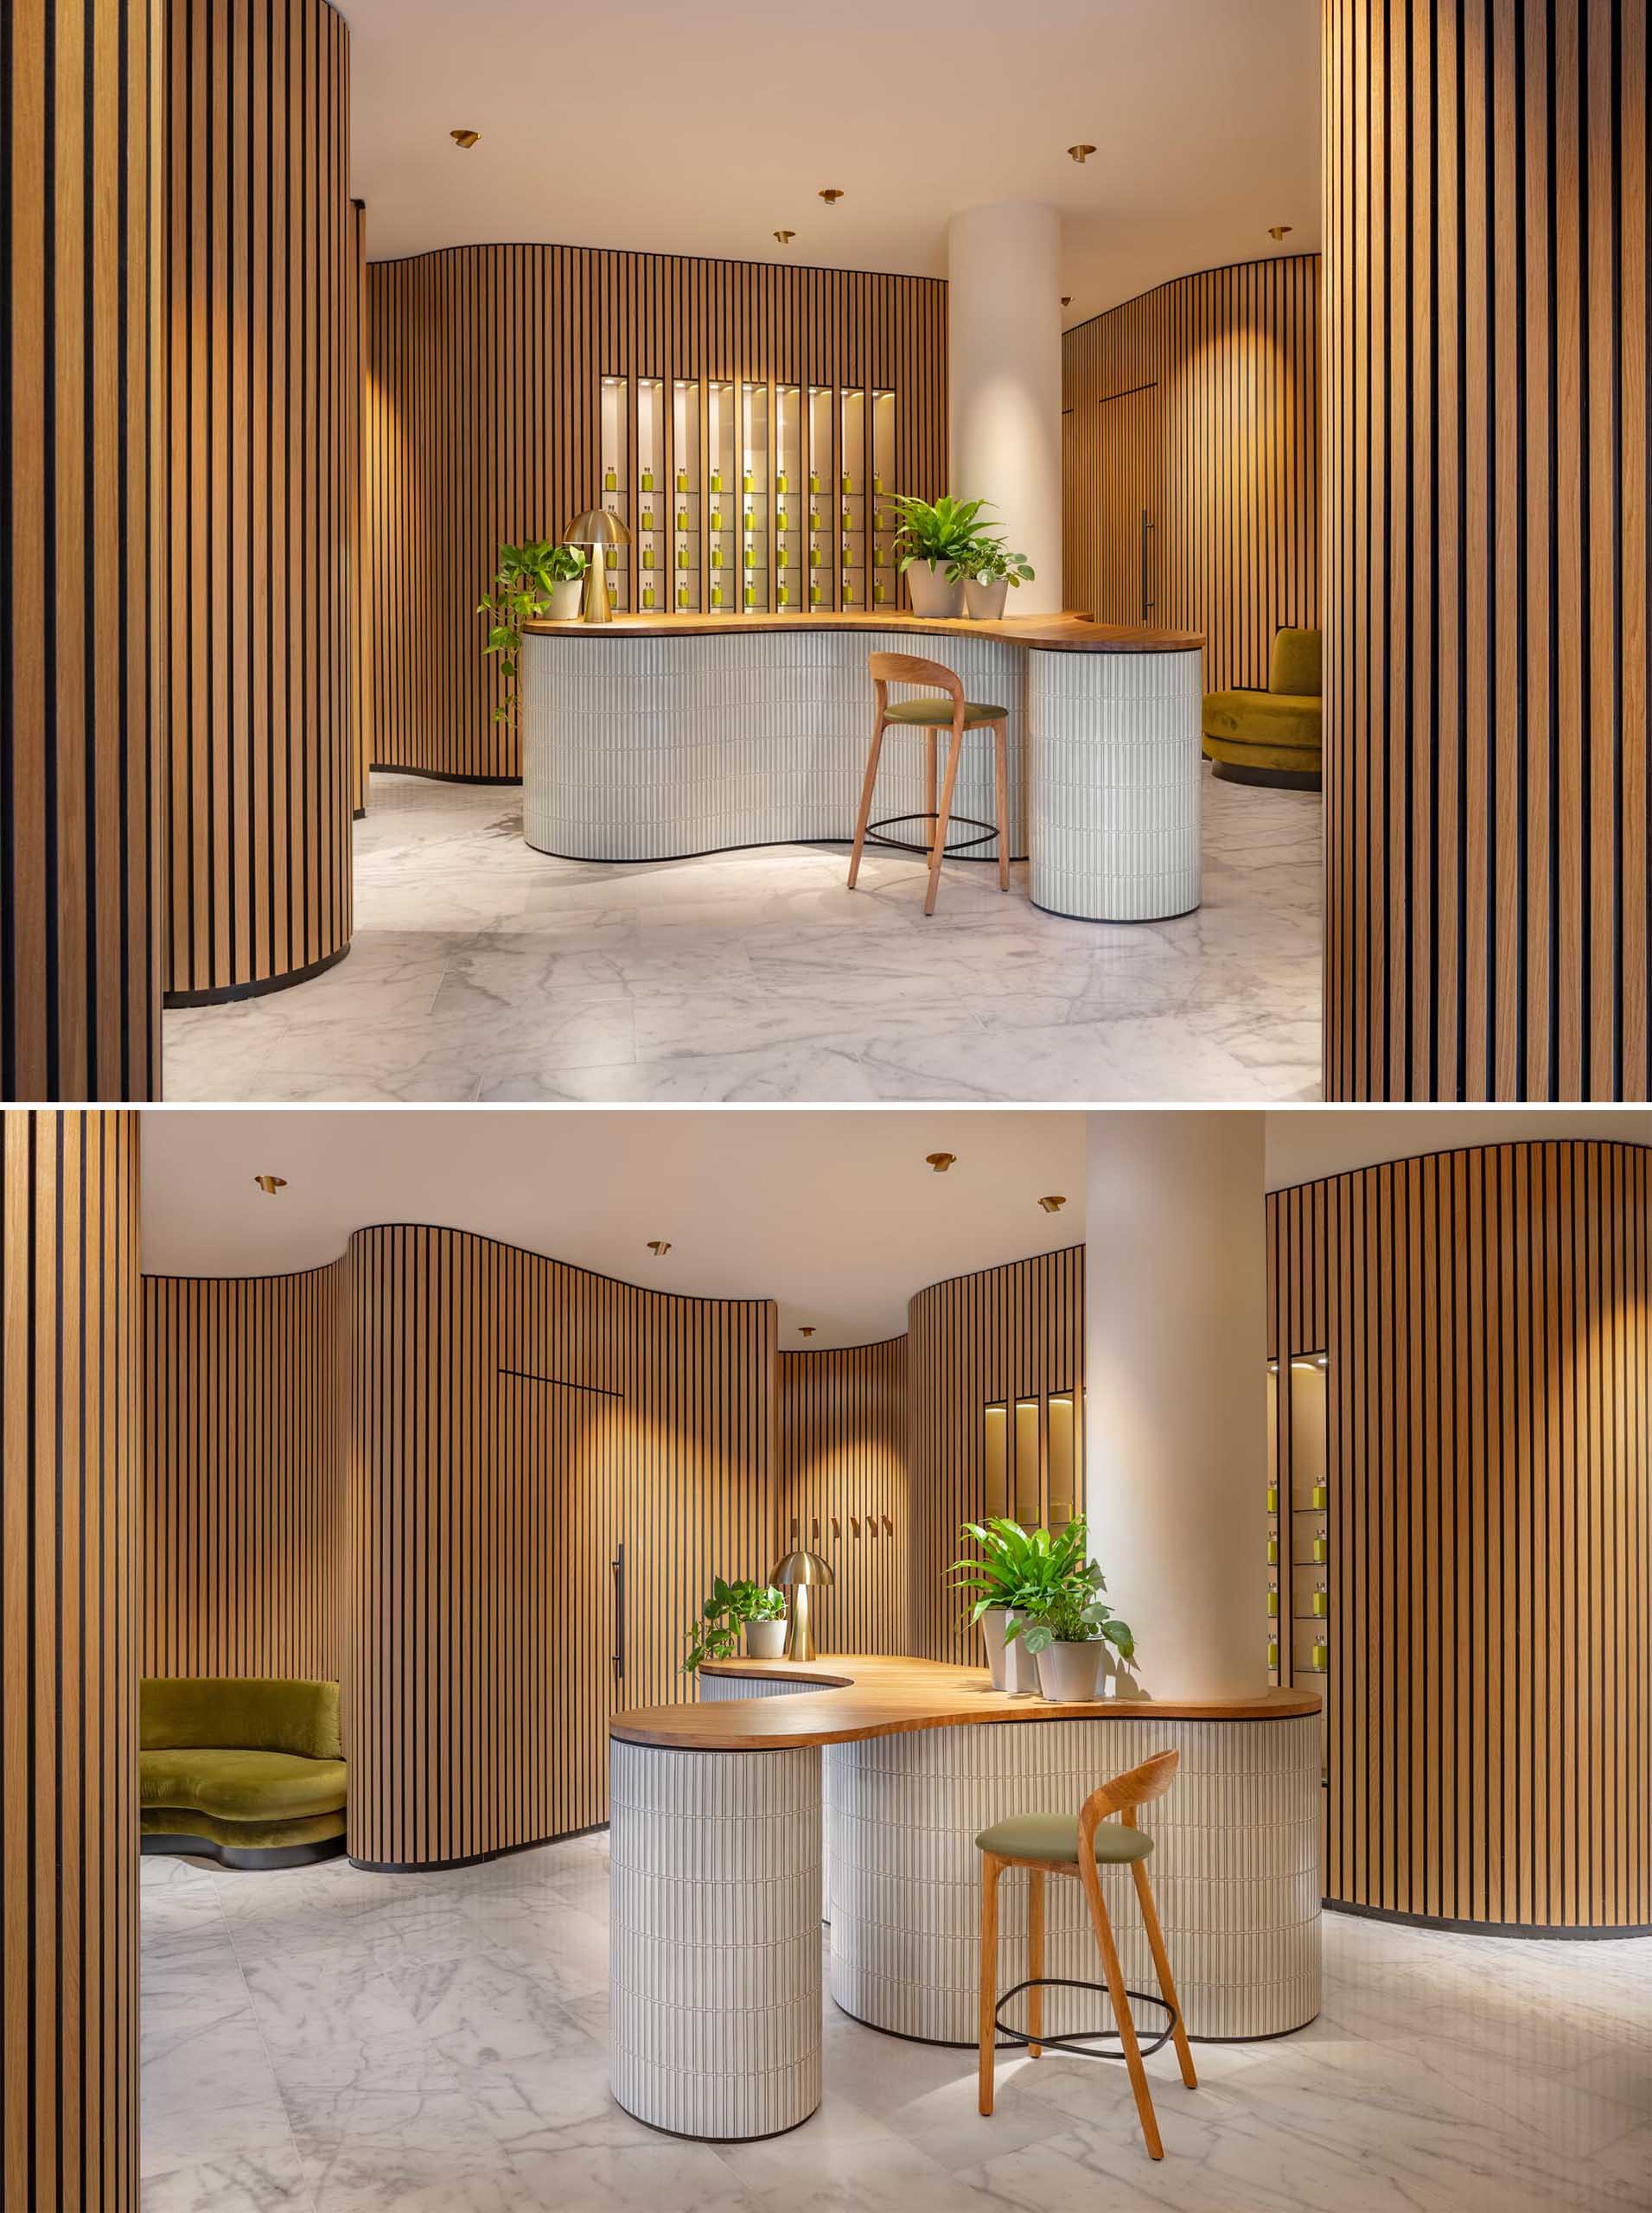 A modern massage boutique with curved wood walls that create a sense of calm and relaxing.